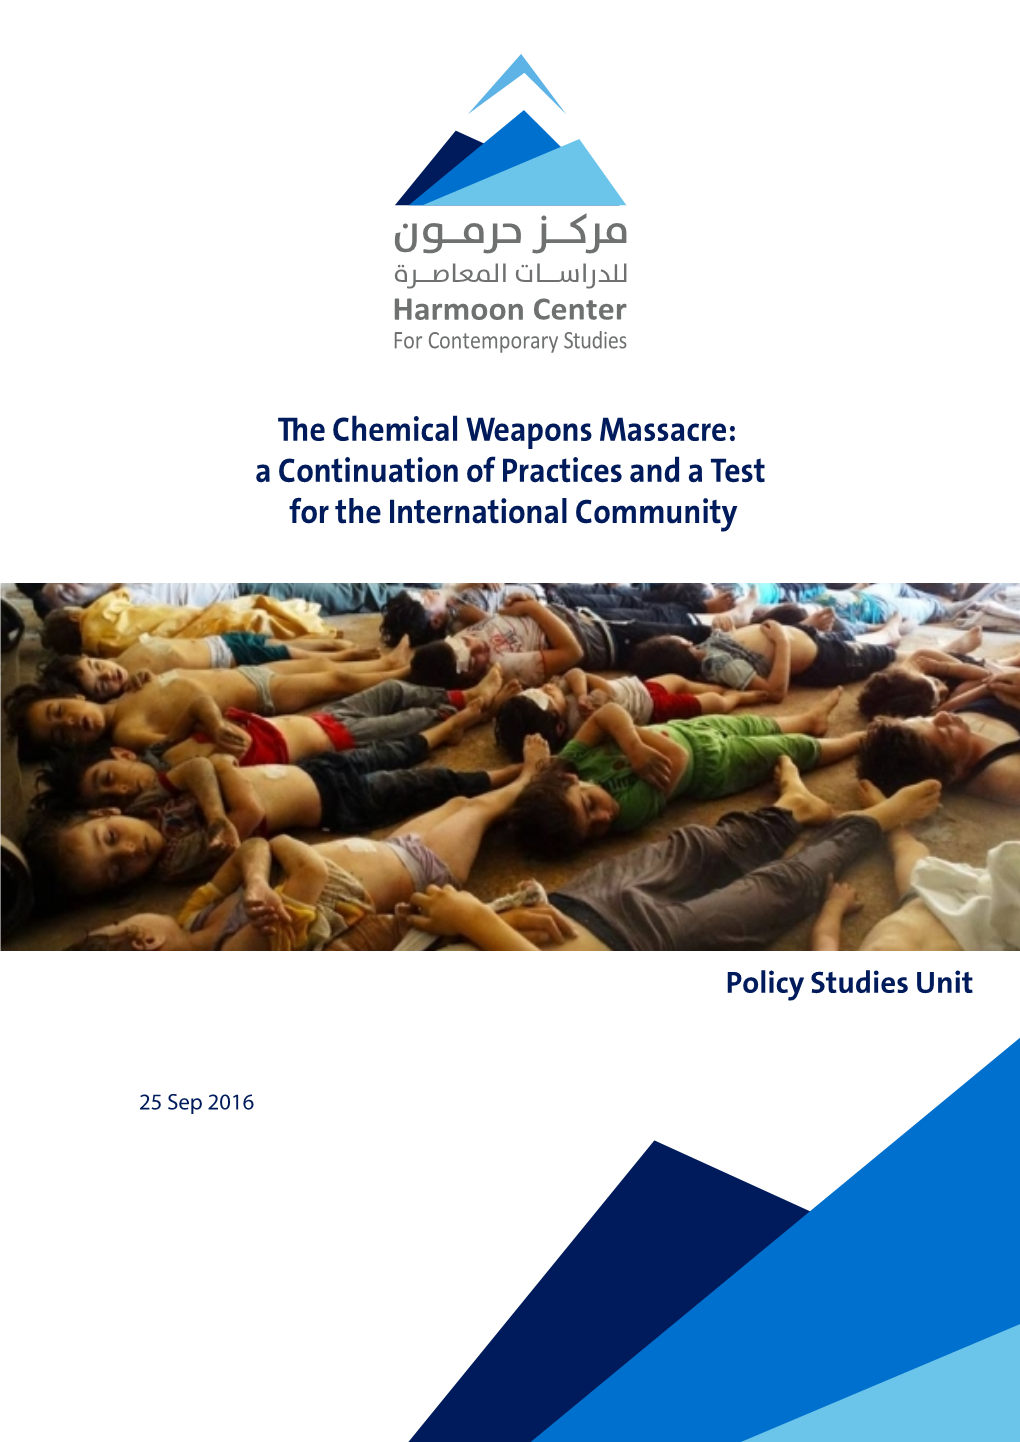 E Chemical Weapons Massacre: a Continuation of Practices and a Test for the International Community